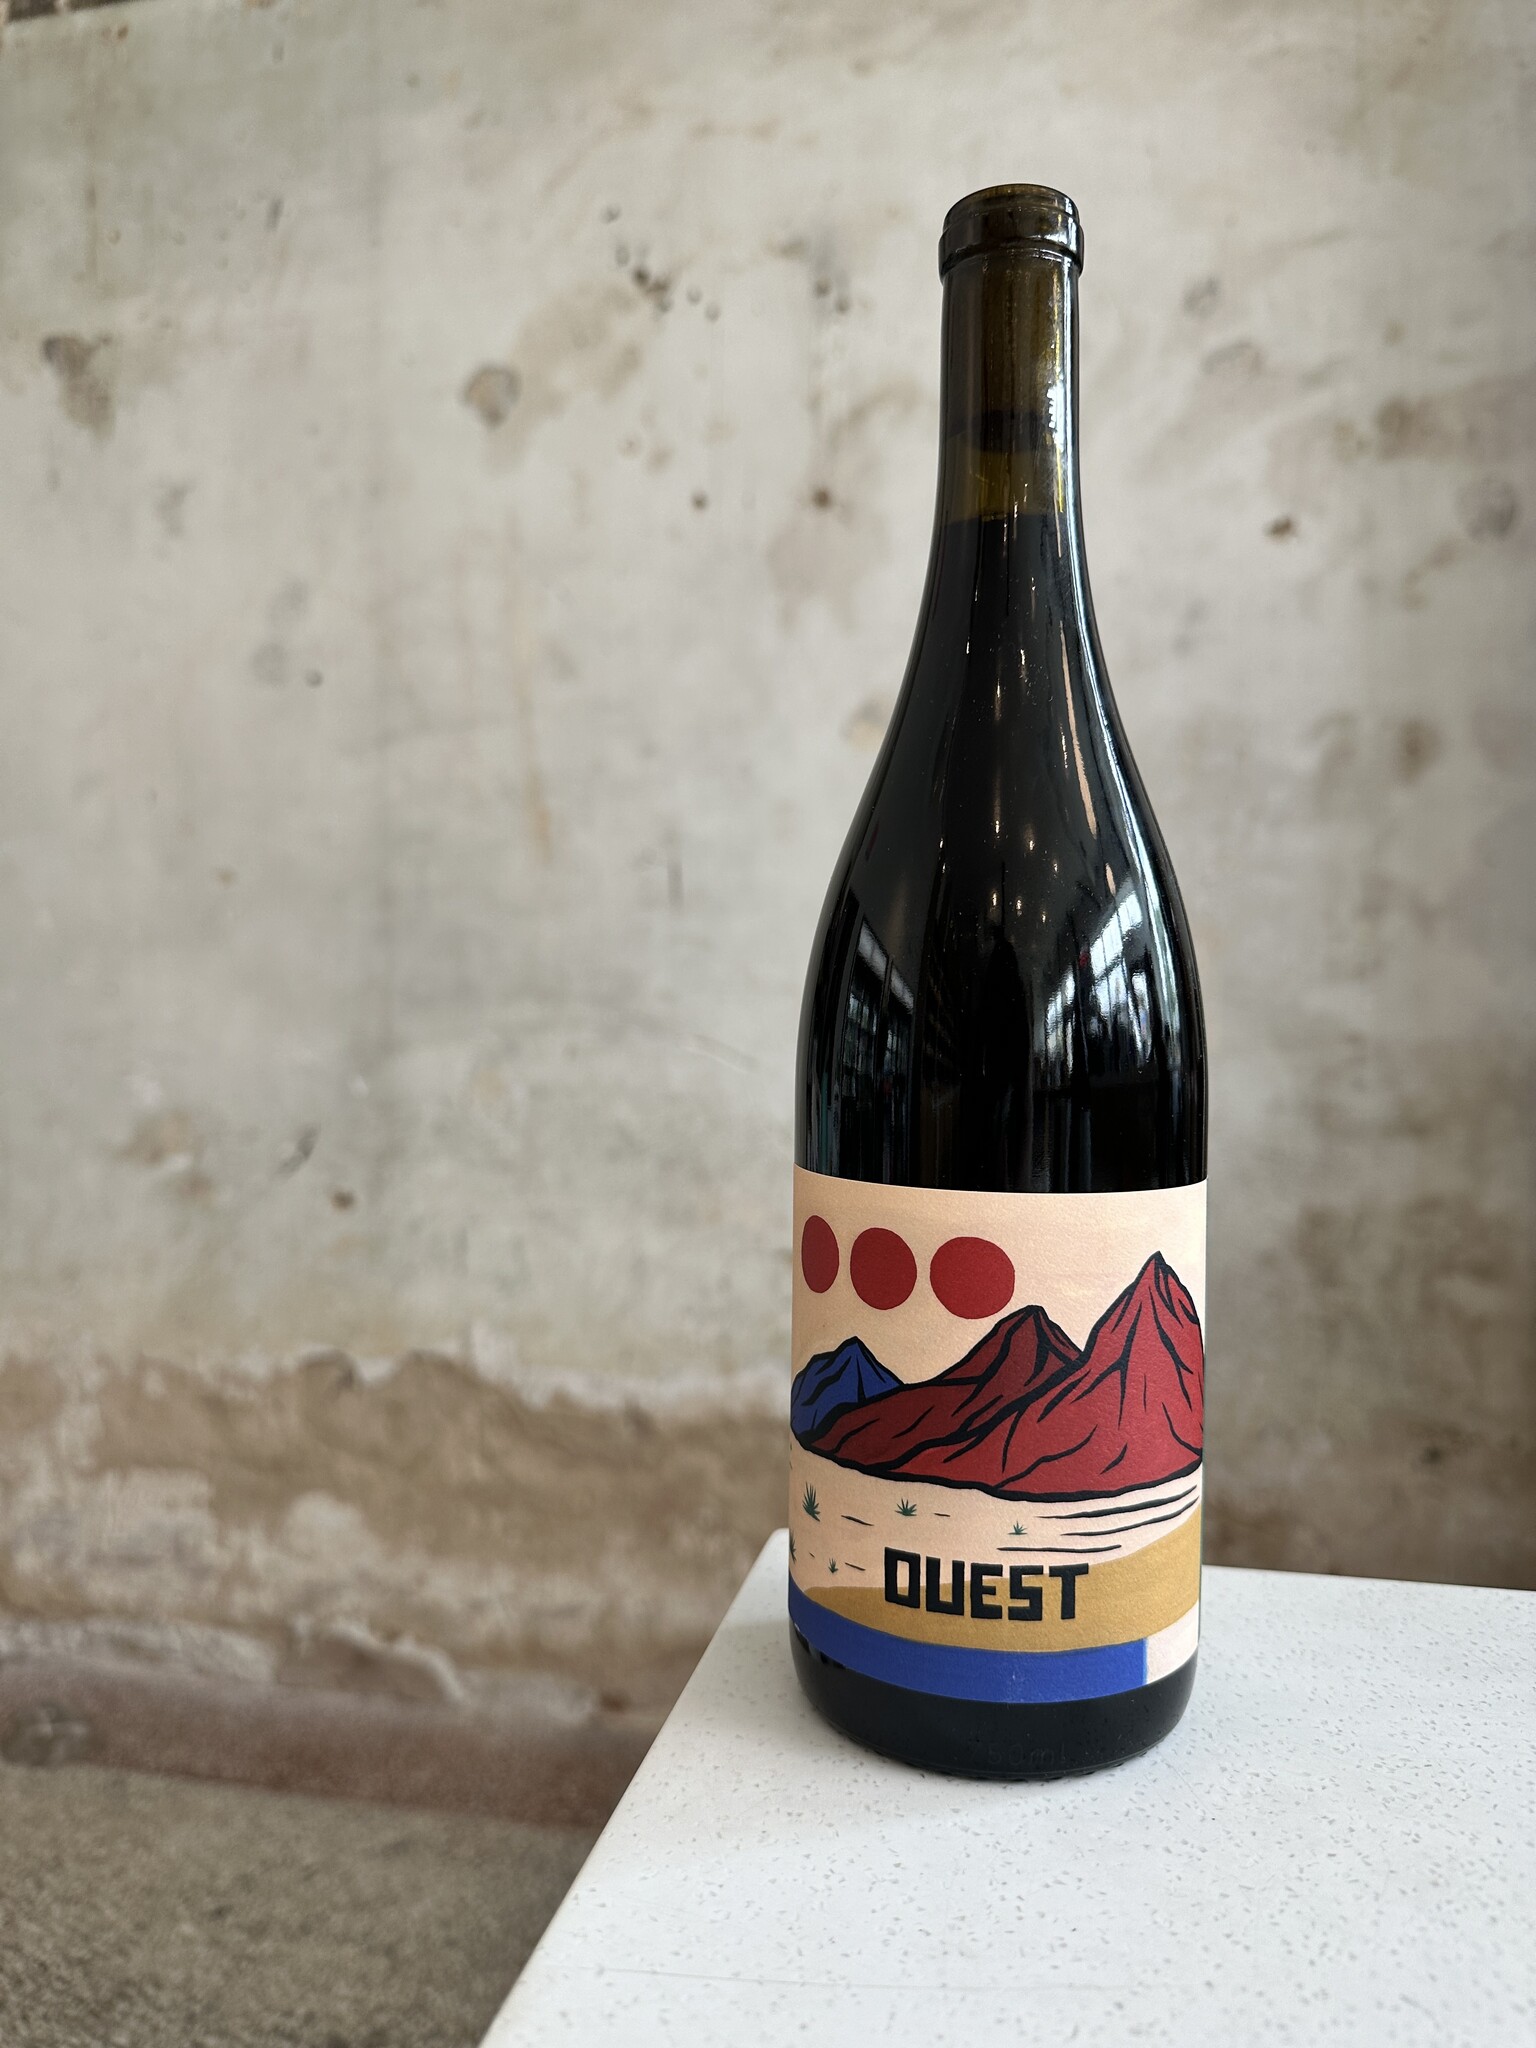 Division 'Ouest' Red Blend